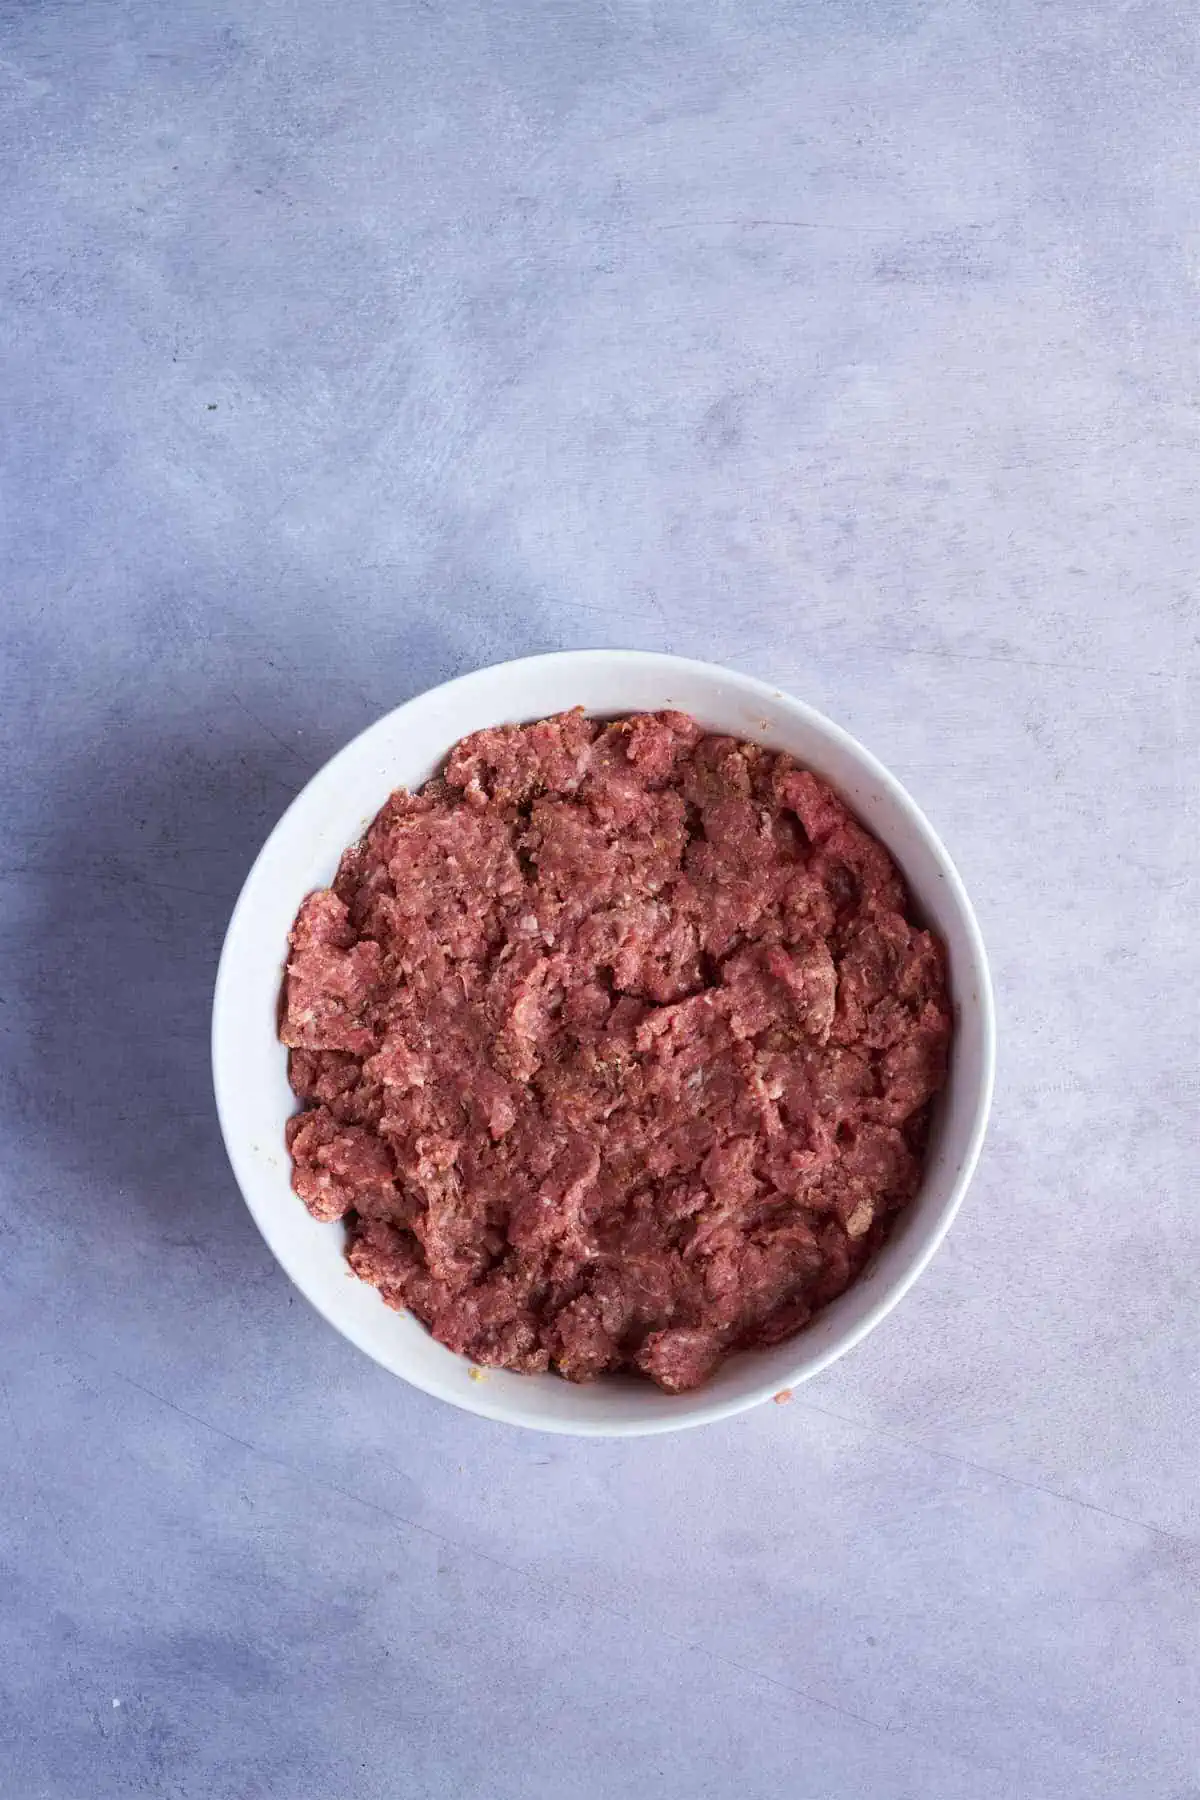 The ground meat mixed with the ingredients.